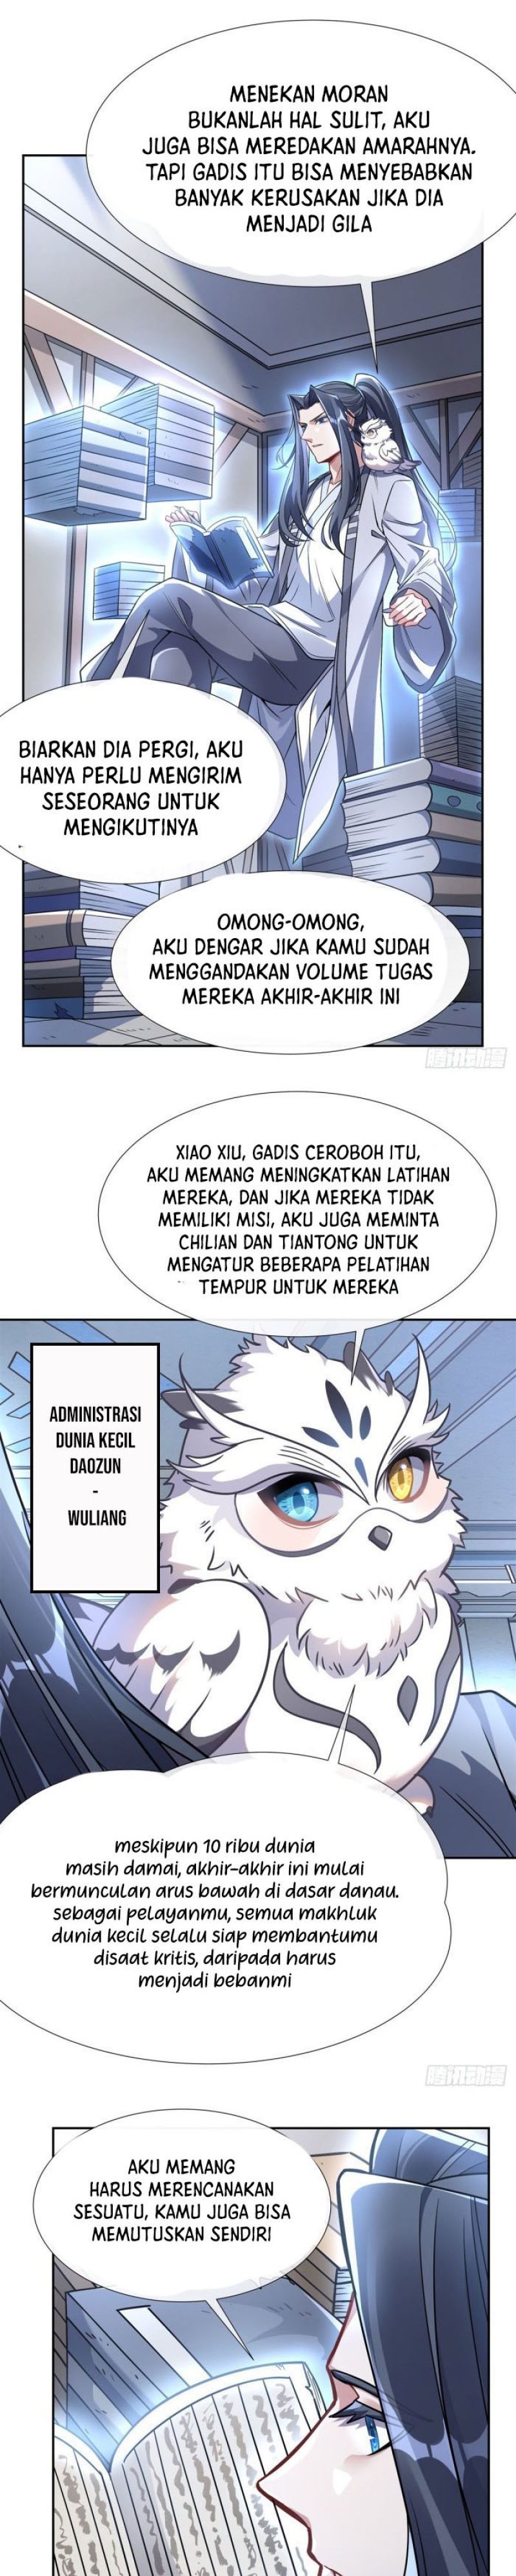 Dilarang COPAS - situs resmi www.mangacanblog.com - Komik my female apprentices are all big shots from the future 127 - chapter 127 128 Indonesia my female apprentices are all big shots from the future 127 - chapter 127 Terbaru 9|Baca Manga Komik Indonesia|Mangacan